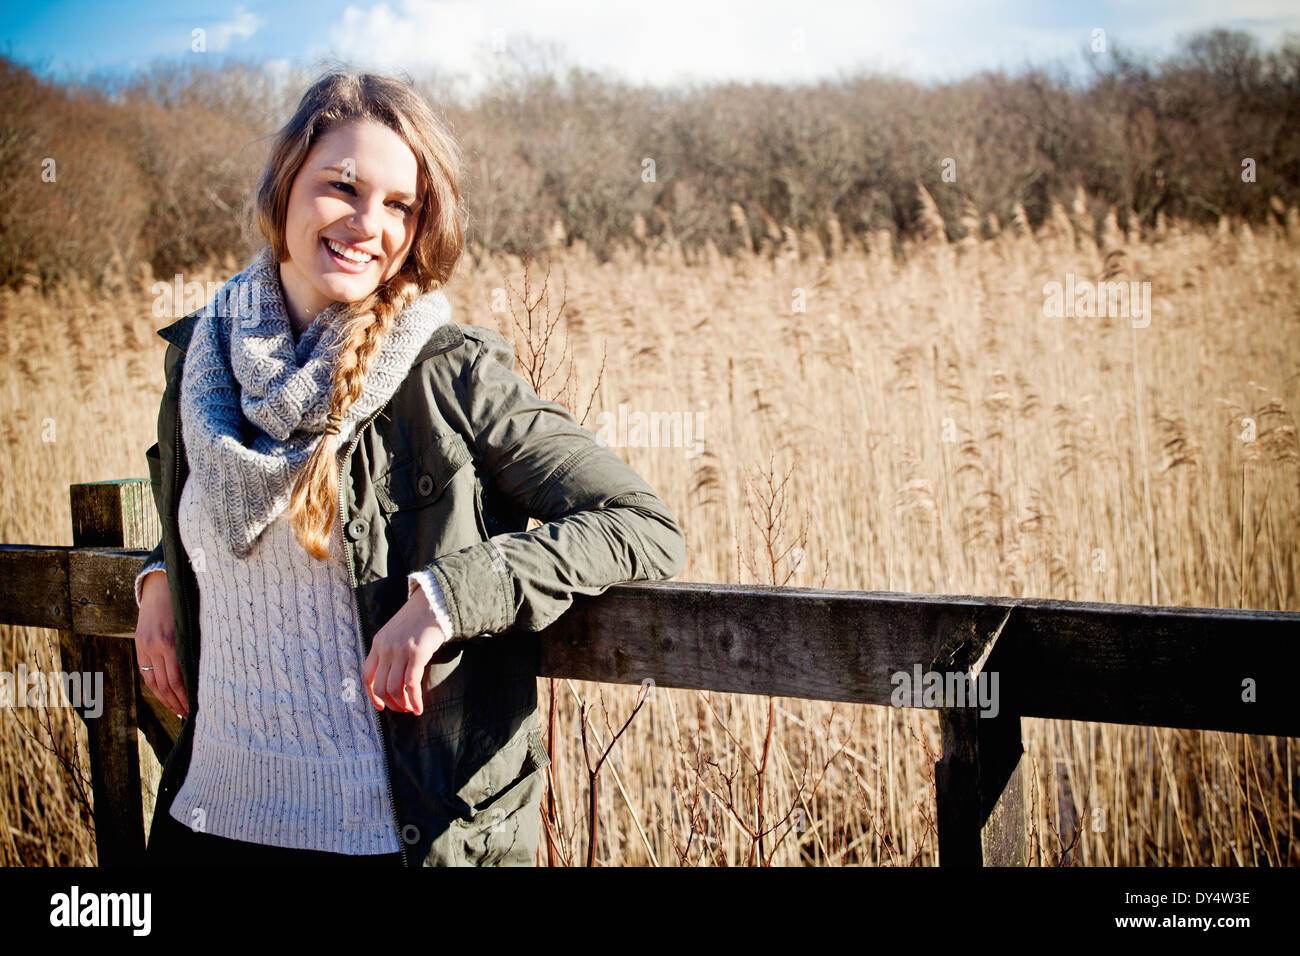 Portrait of young woman leaning against fence Stock Photo